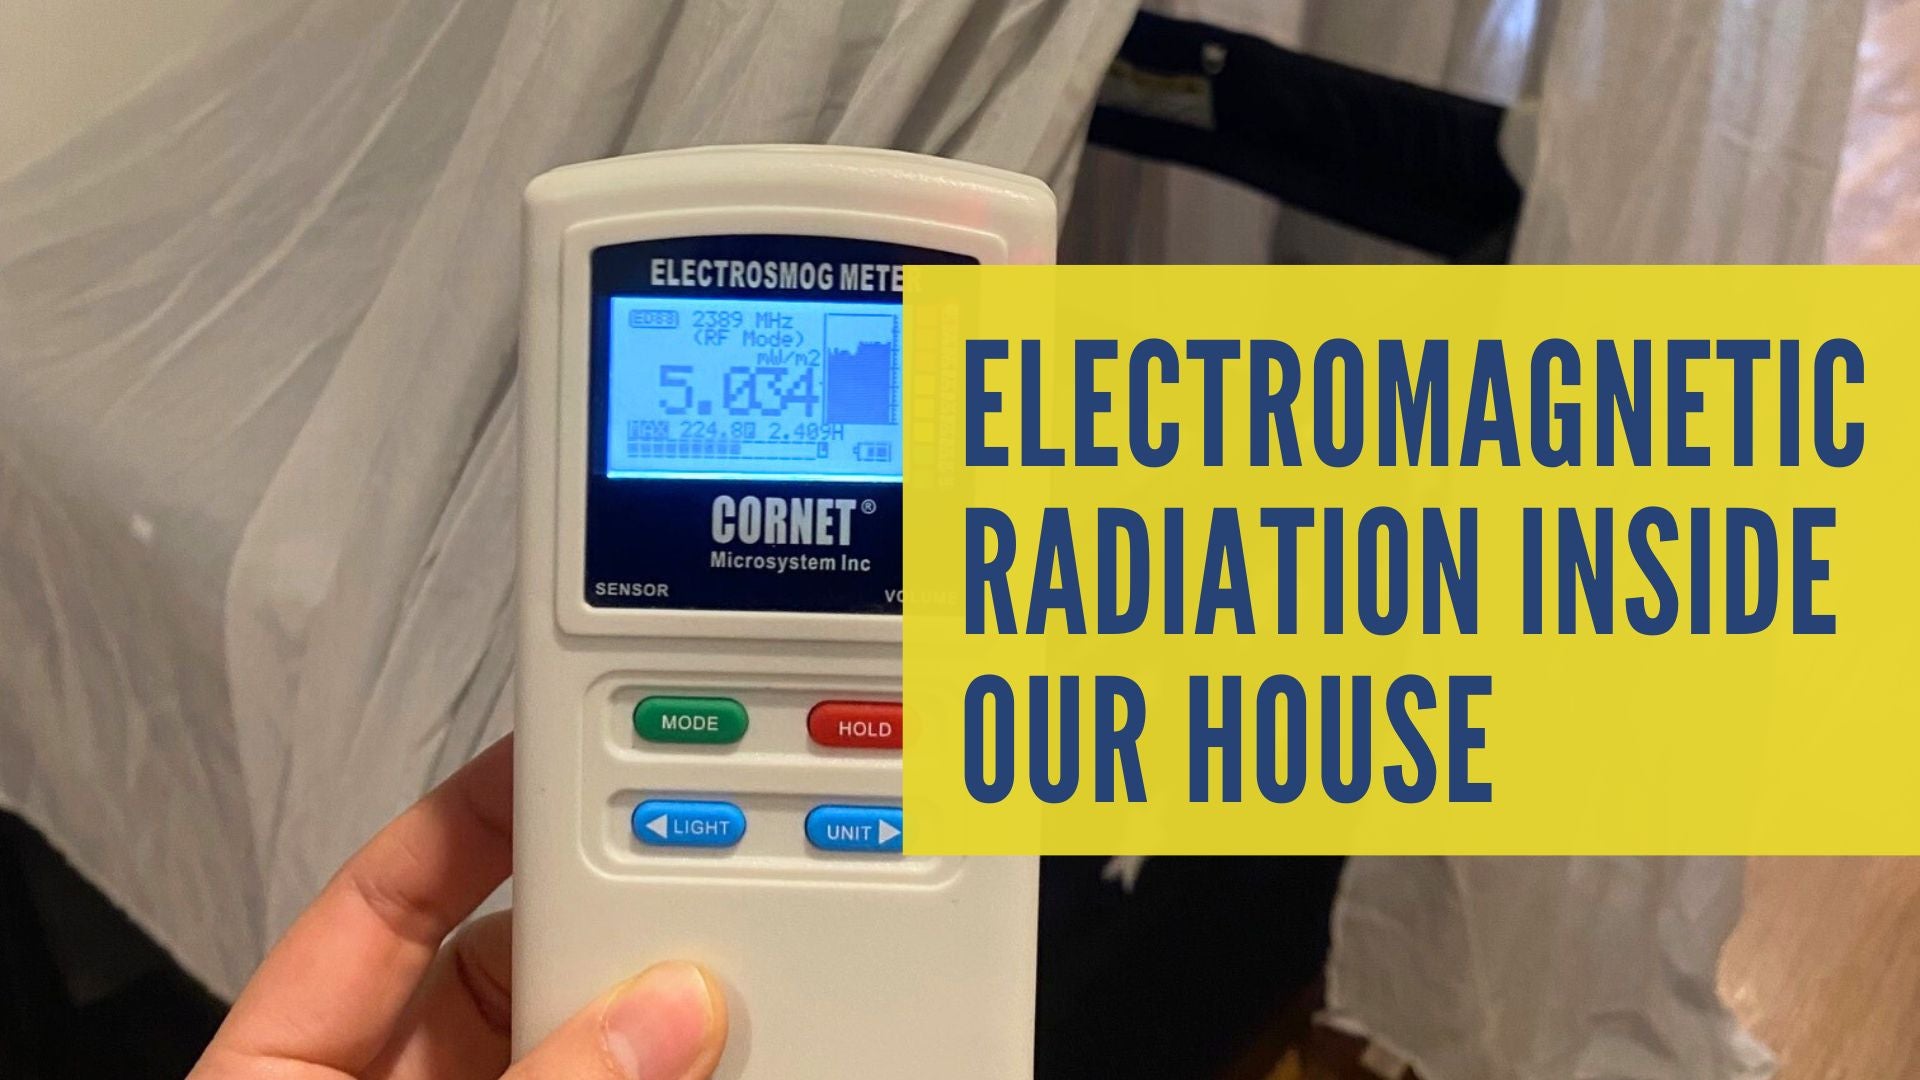 Electromagnetic Radiation Inside Our House